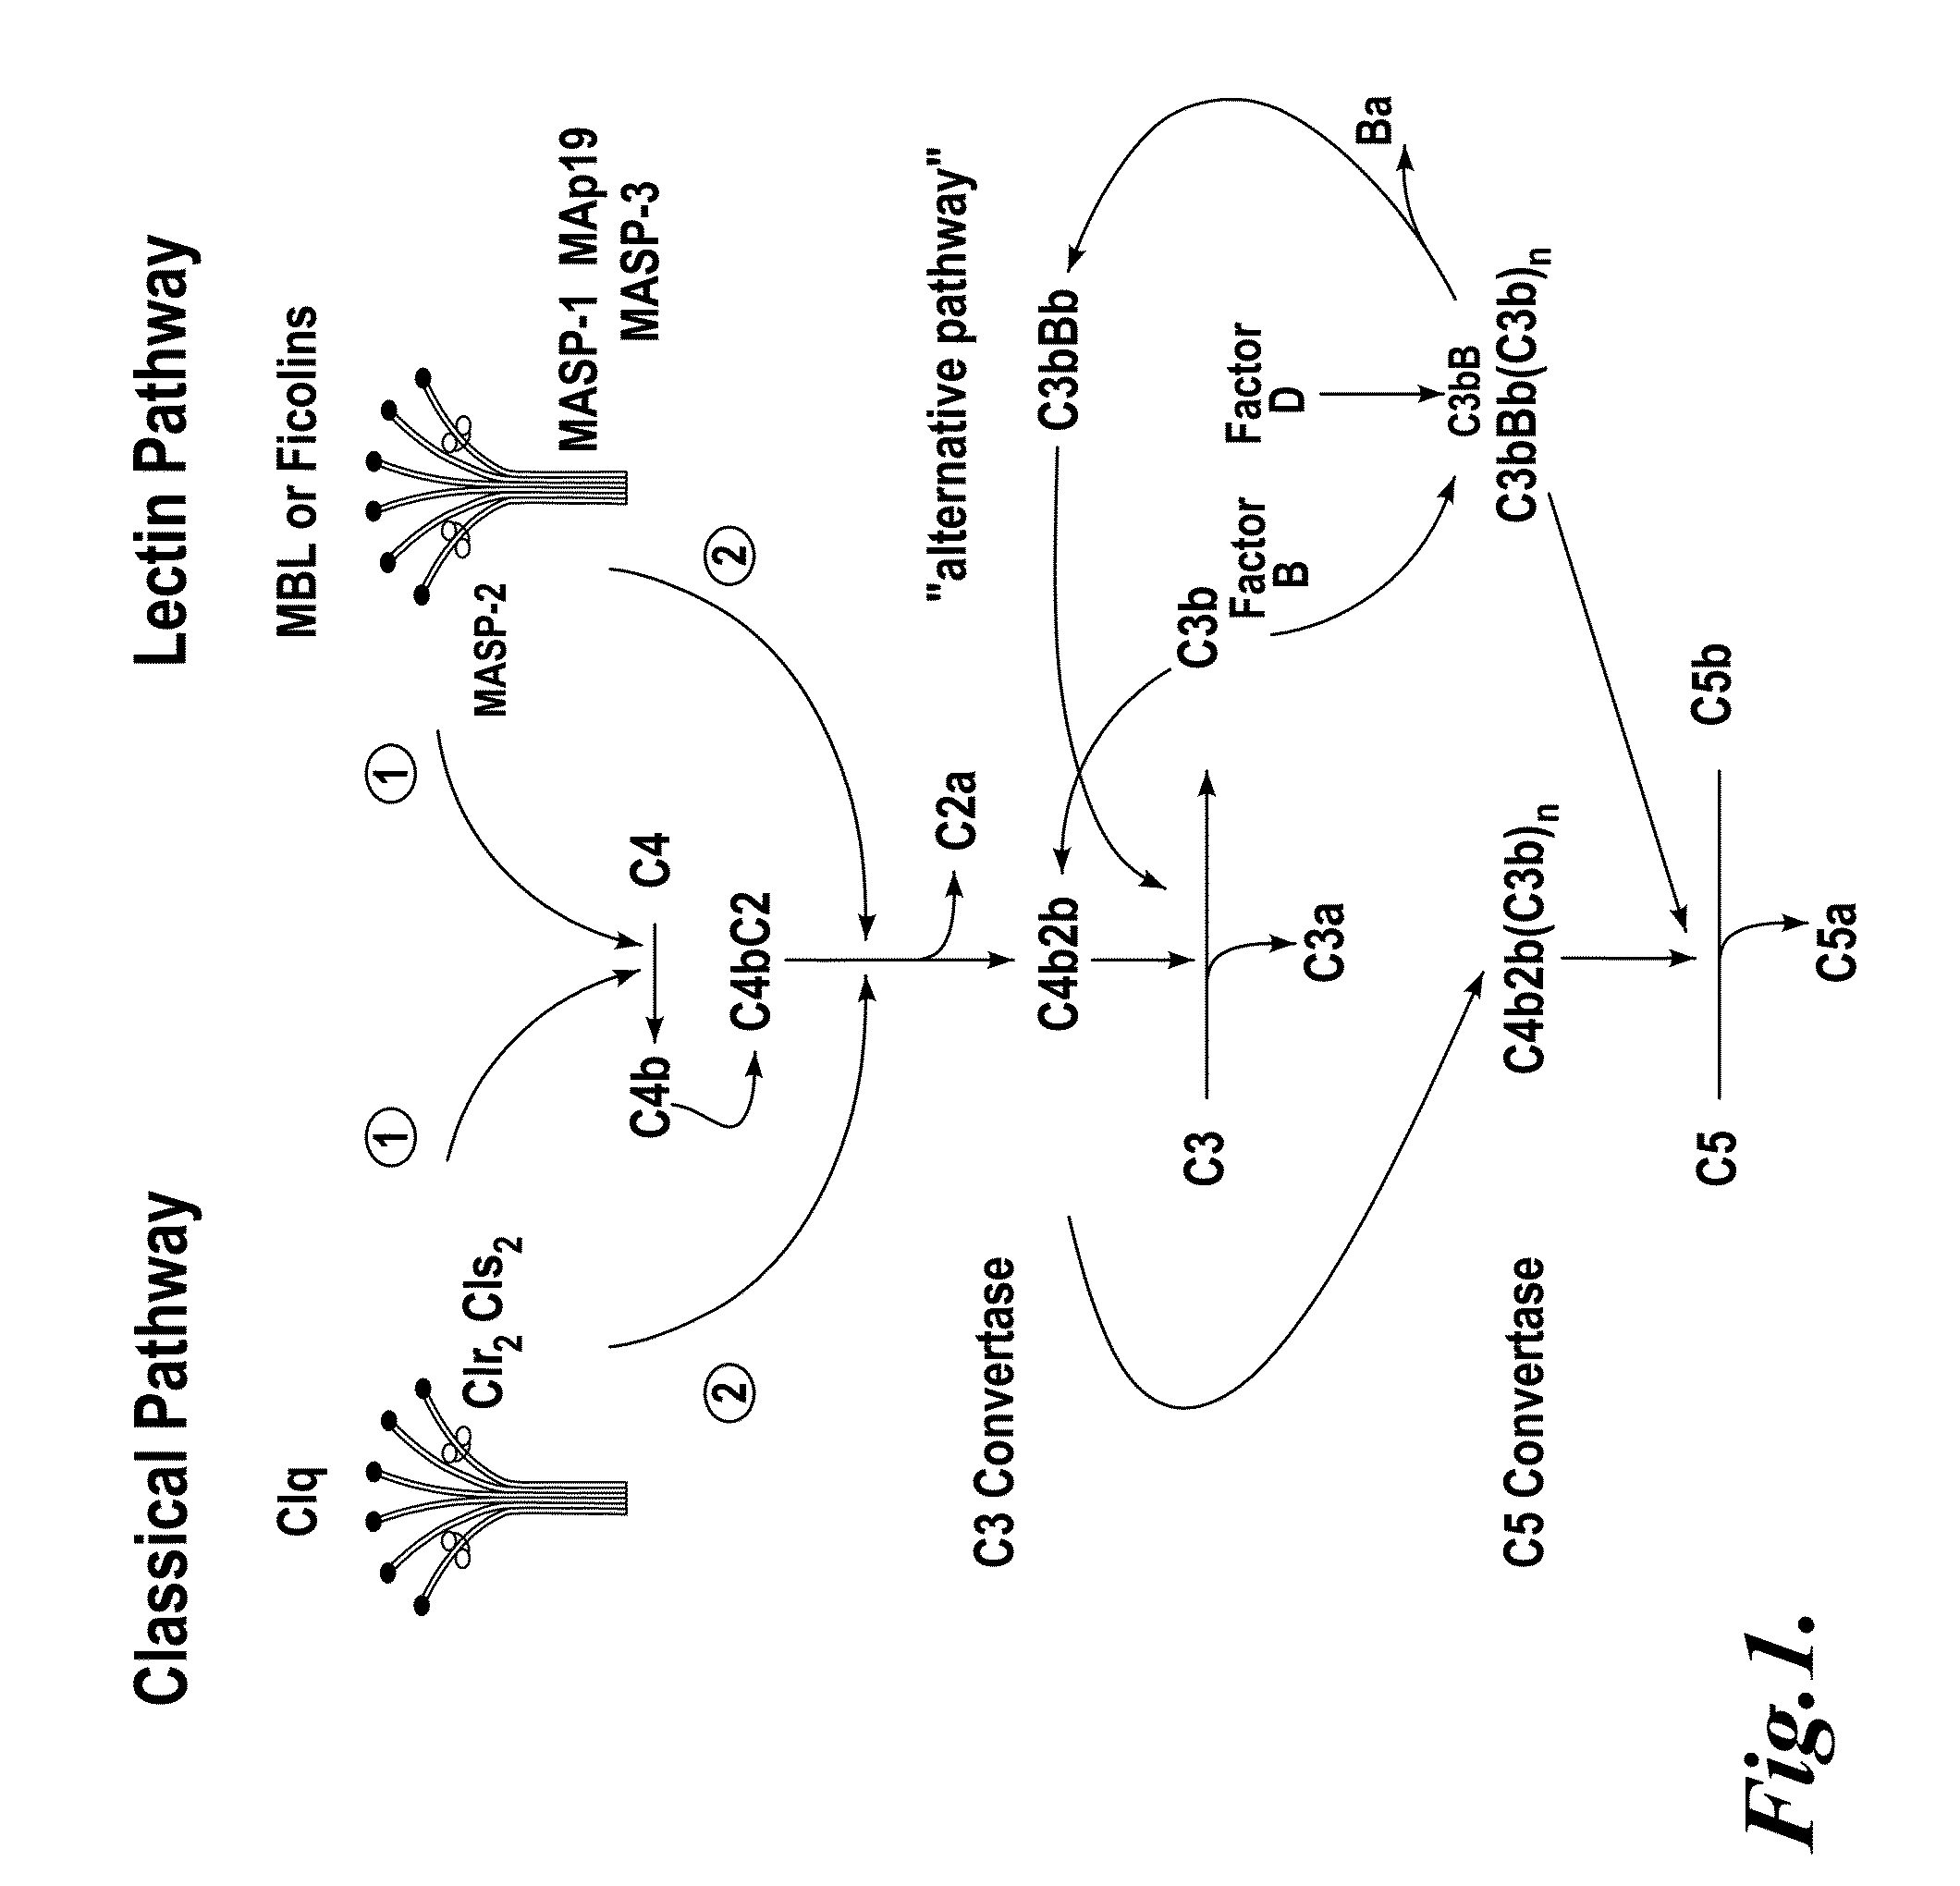 Methods for treating conditions associated with MASP-2 dependent complement activation